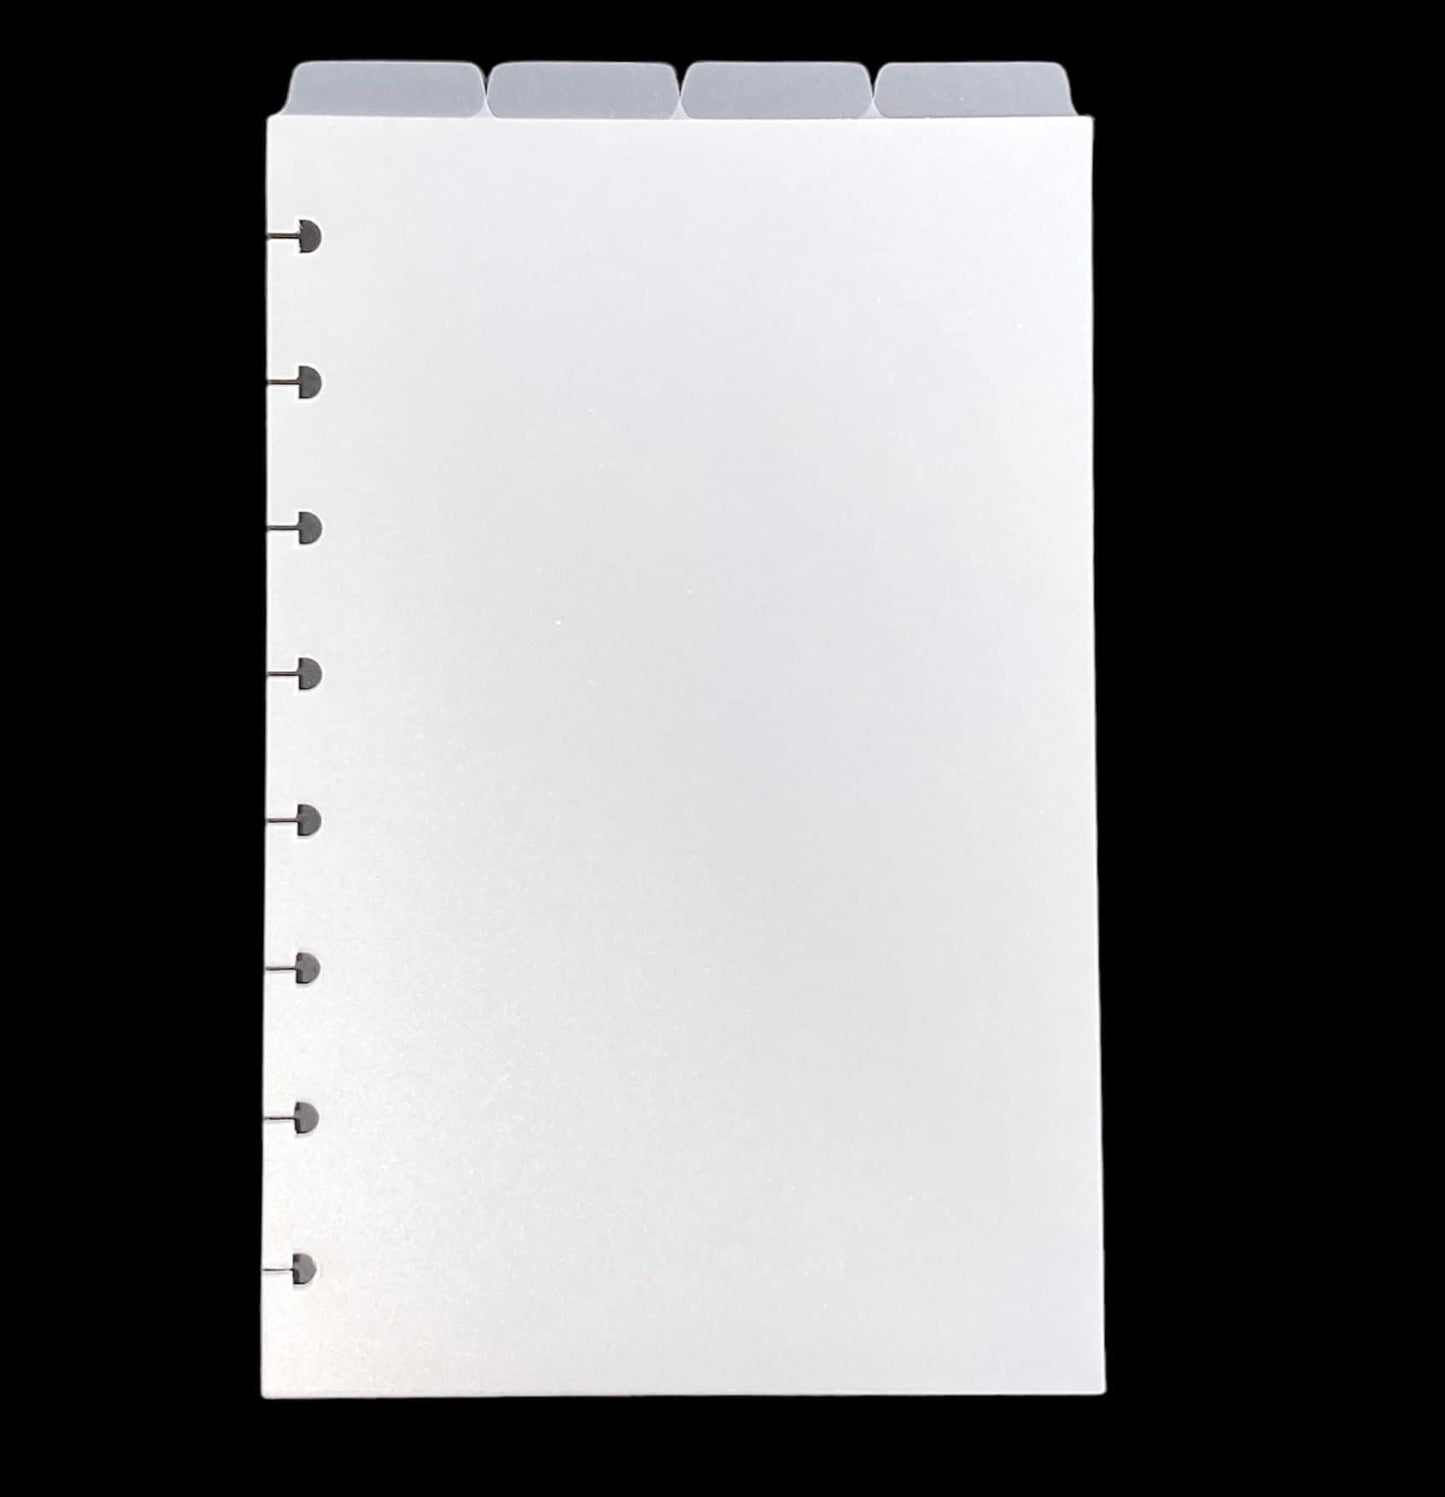 TOP TAB DISC Dividers || Half Letter, 4 Top Tabs, 8 Disc Punch, Clear, Transparent Frost